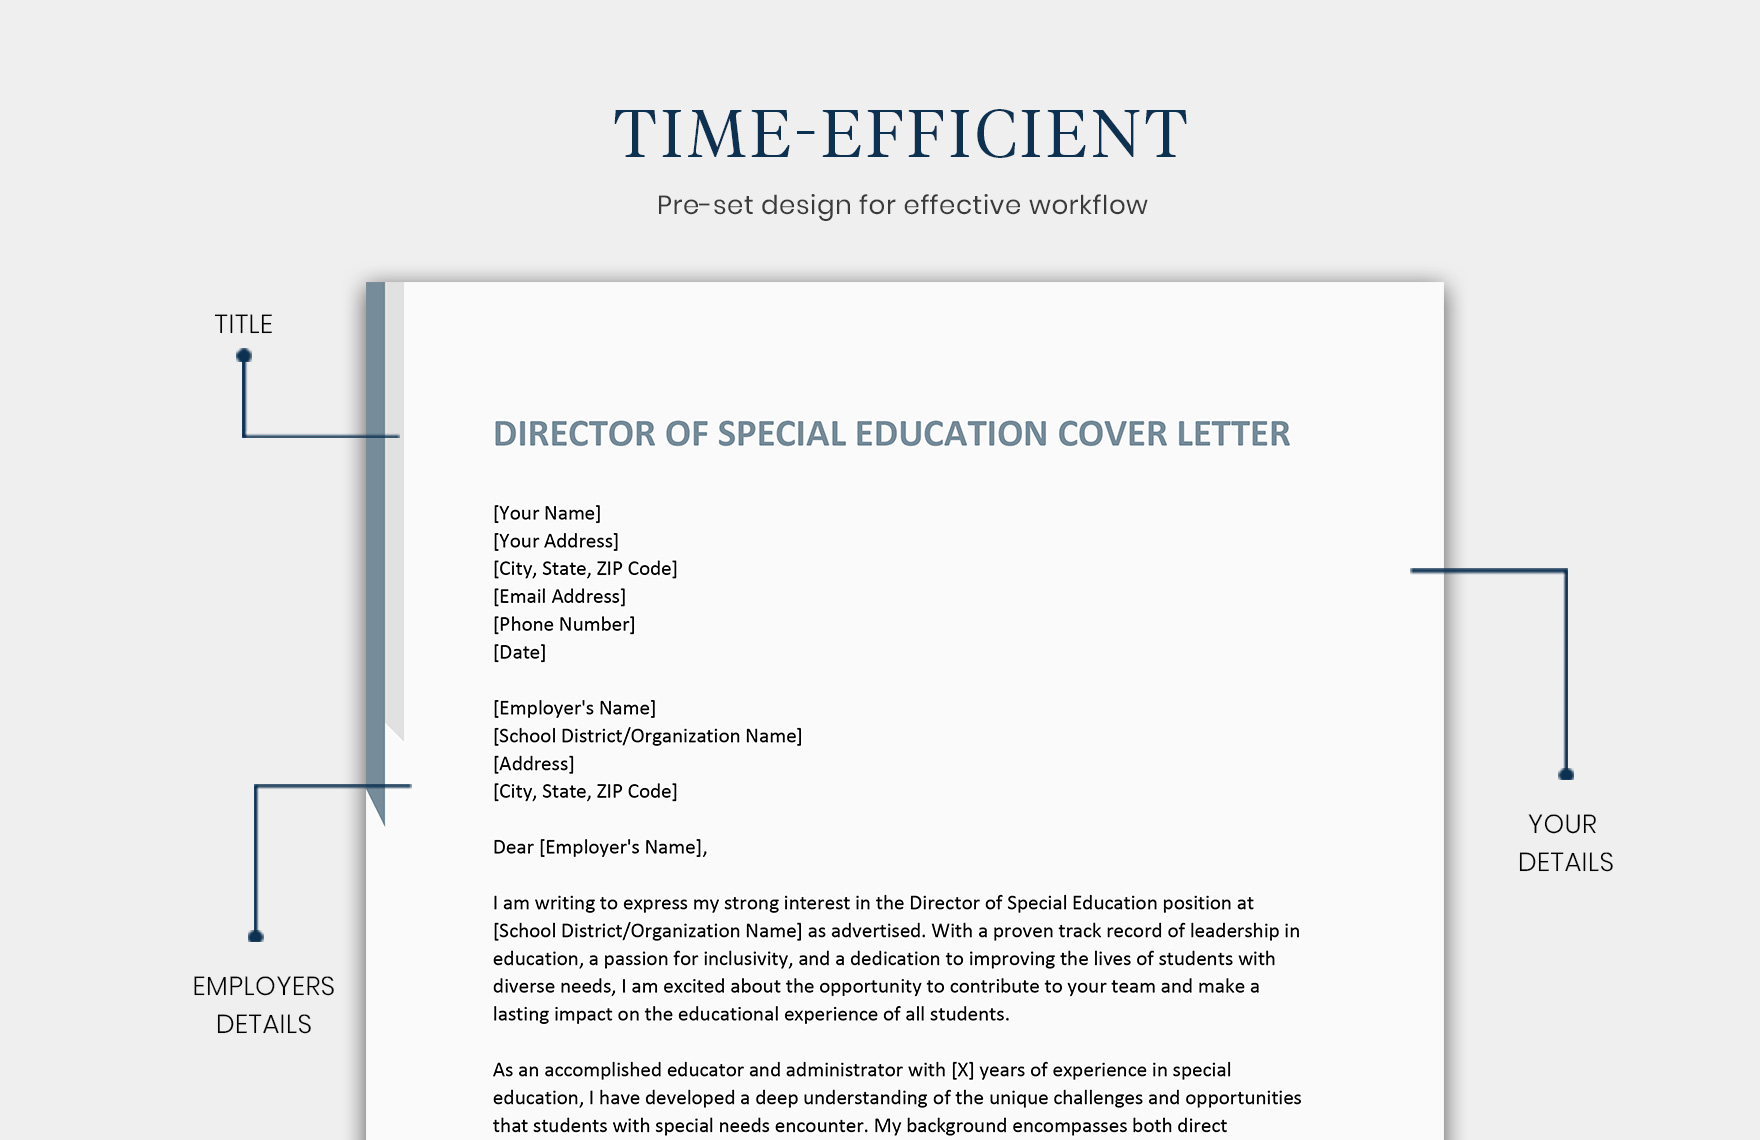 Director of Special Education Cover Letter